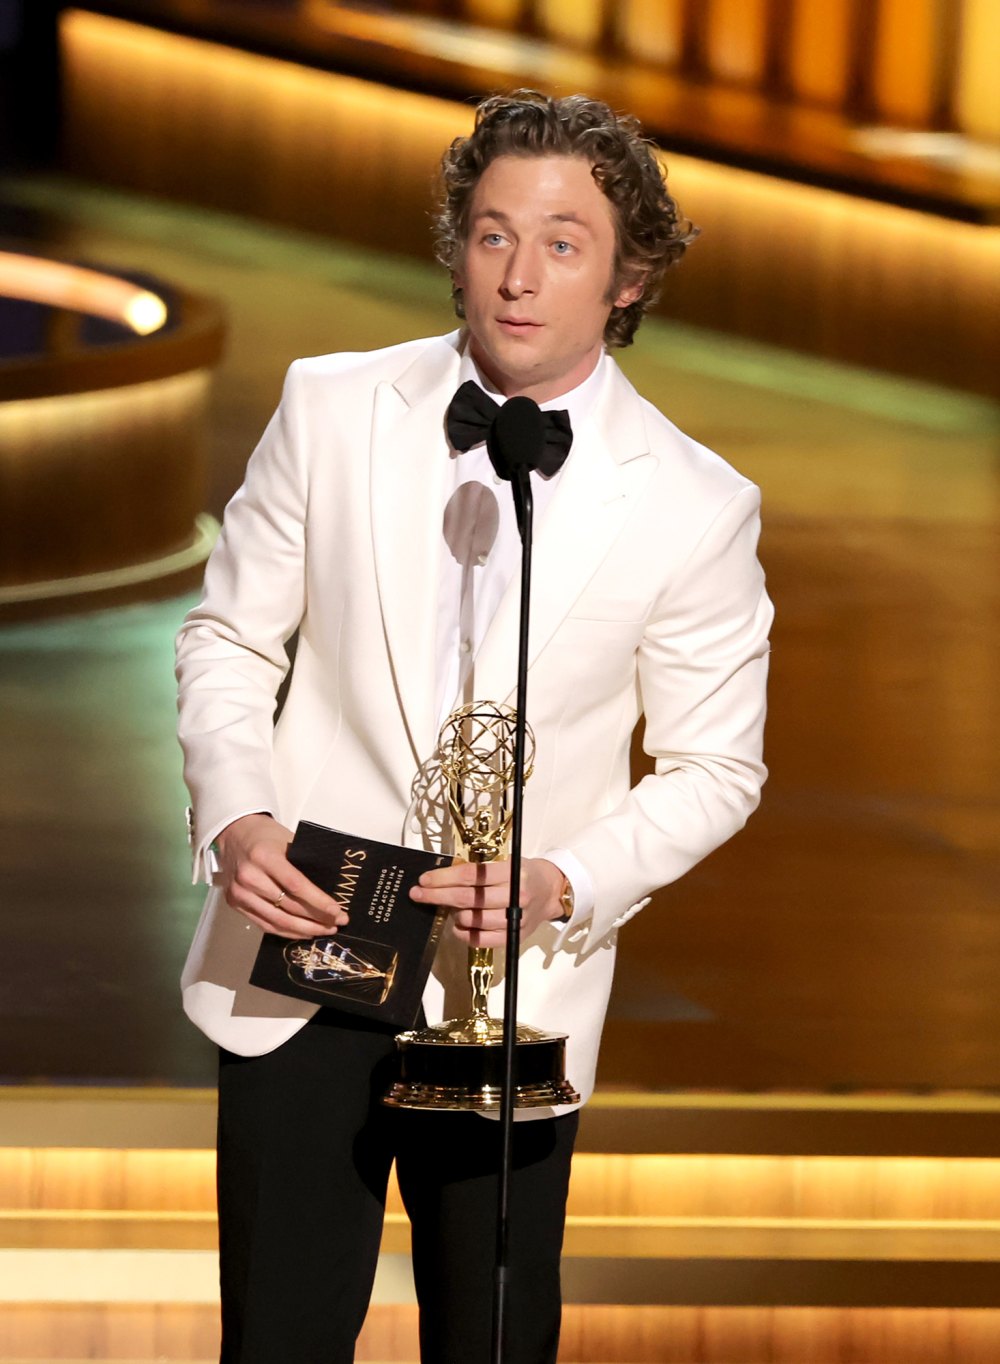 Jeremy Allen white Wins Best Lead Actor in a Comedy at Emmy Awards